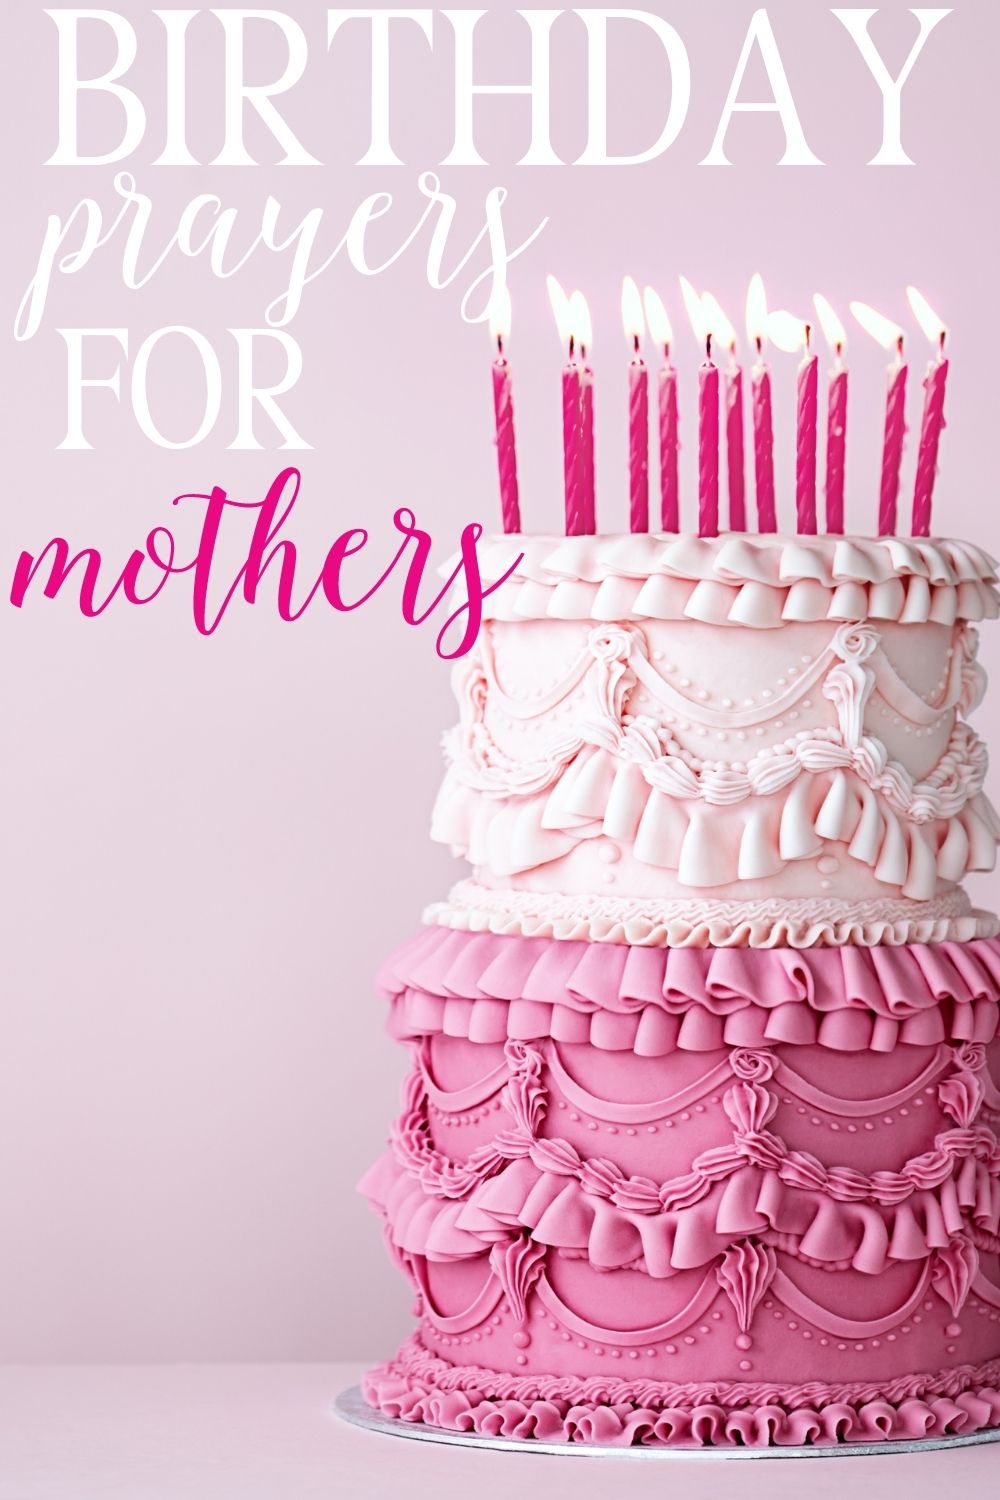 Pinterest pin about birthday prayers for mothers with a two tone pink tiered cake with pink candles